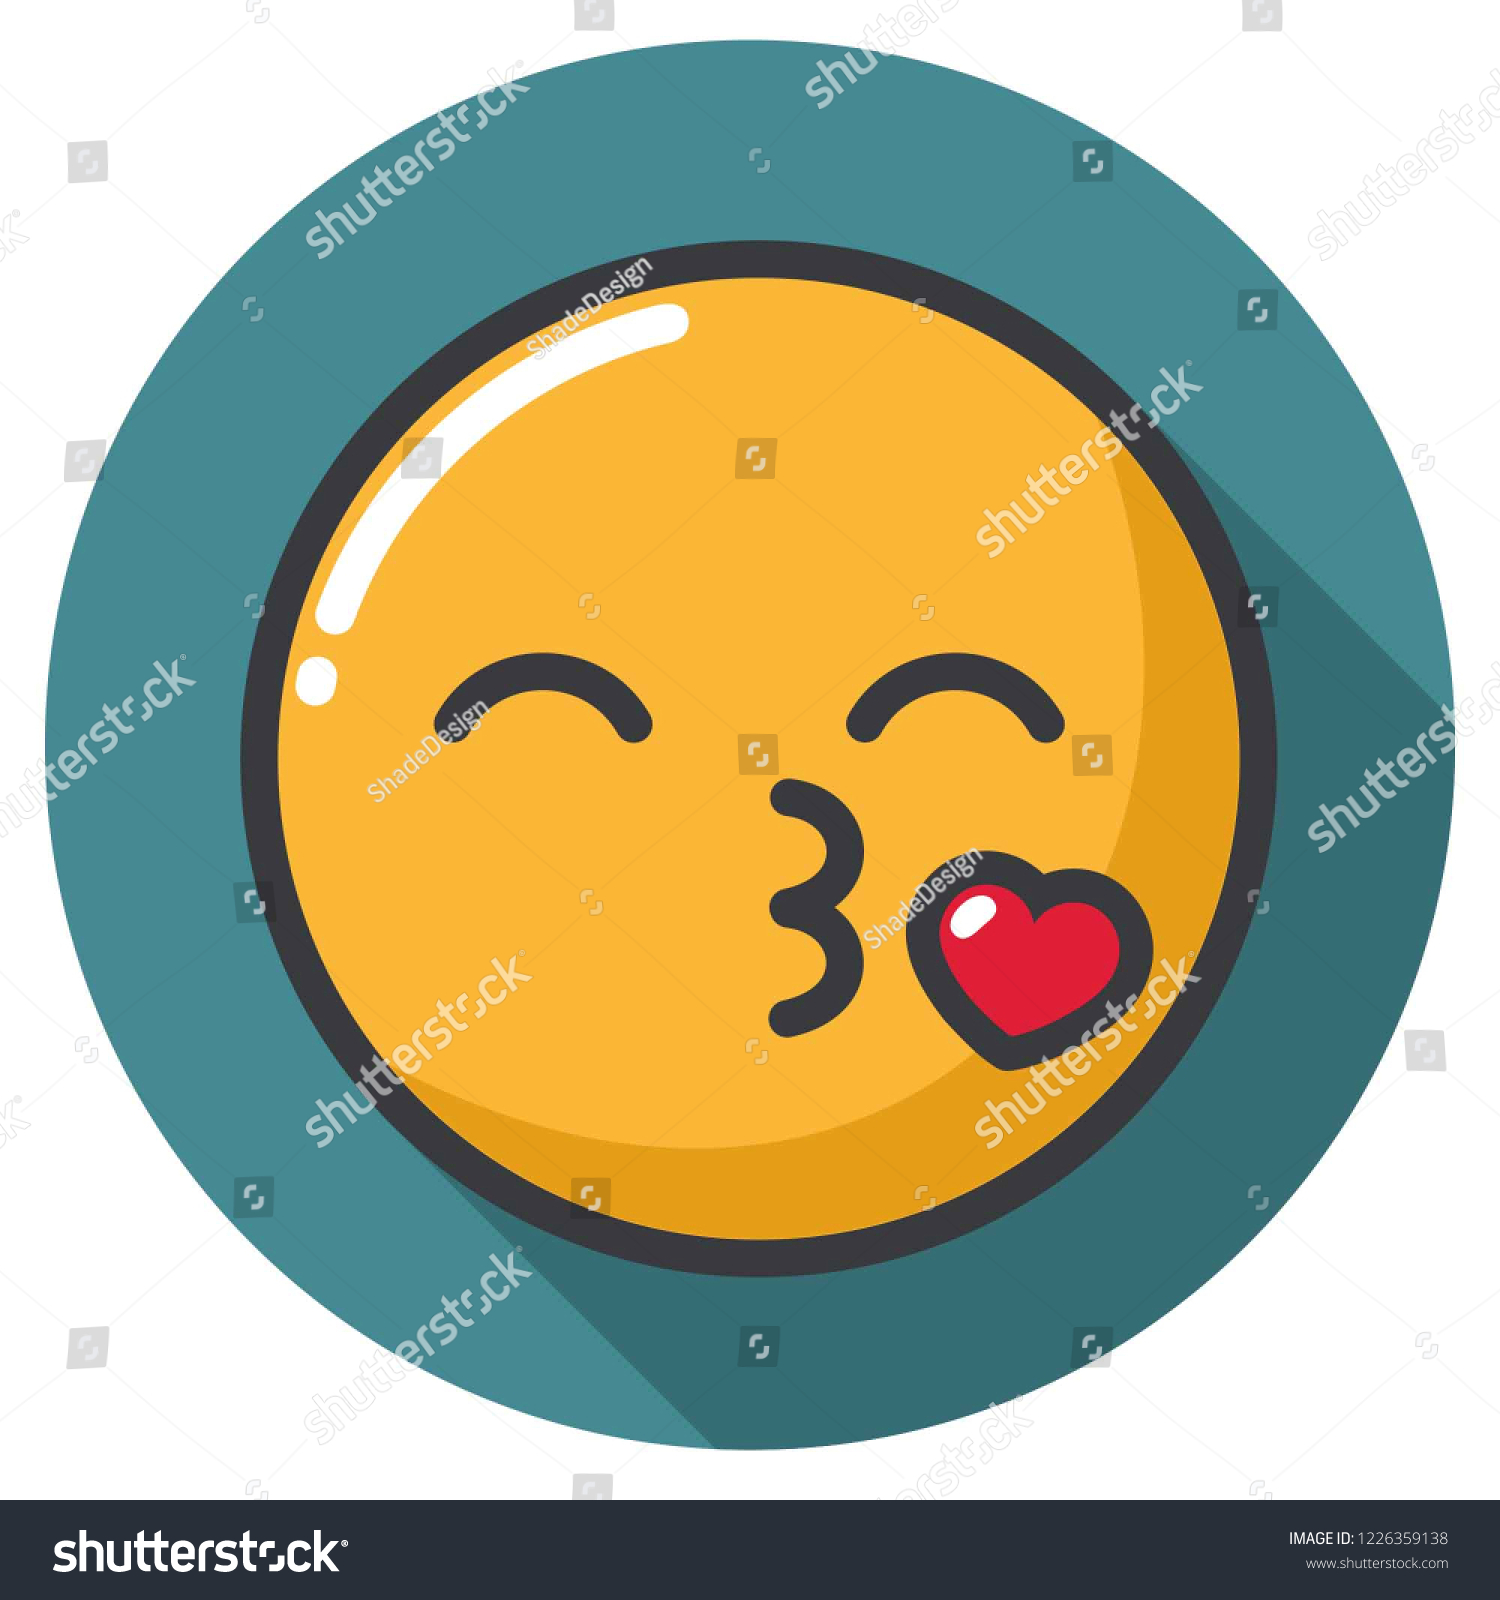 SVG of Vector emotion icon blowing kiss smile. Illustration in flat style. svg